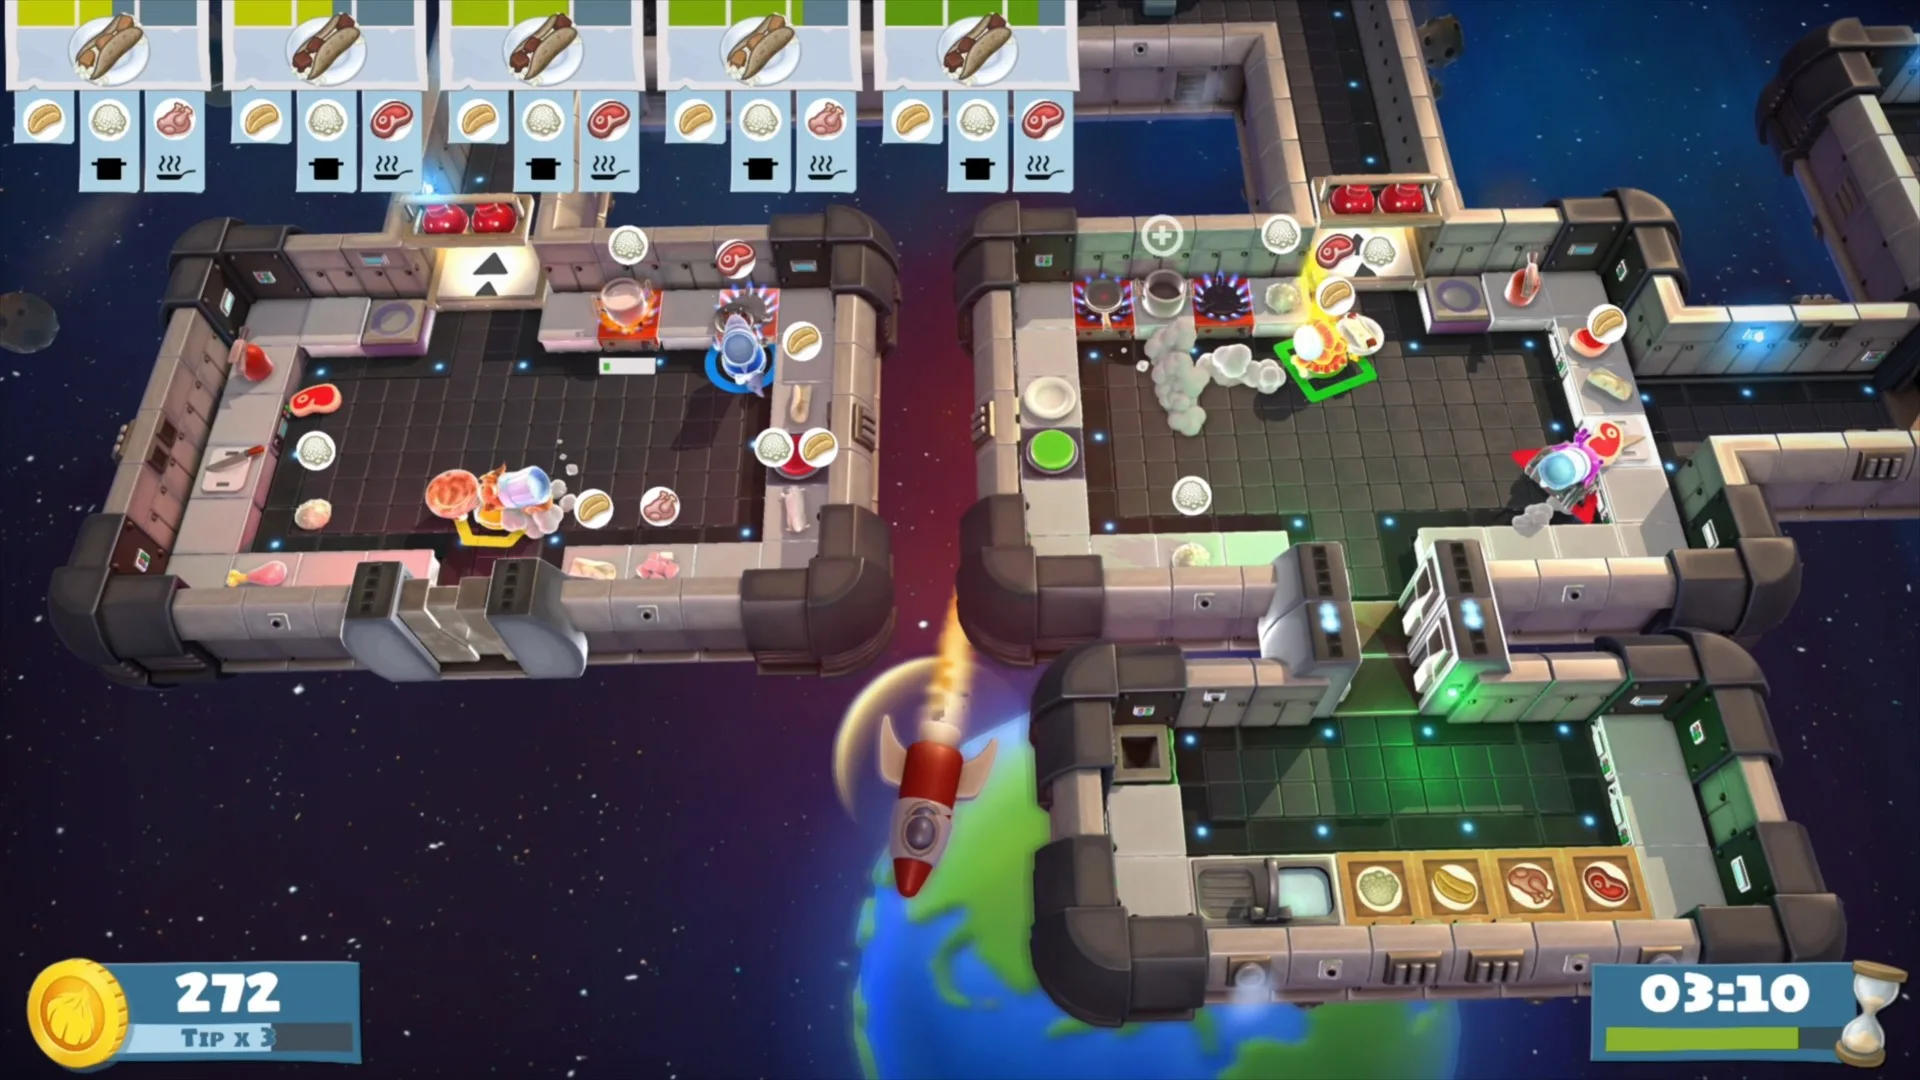 Is Overcooked 2 Finally Cross-Platform in 2023? [The Truth]